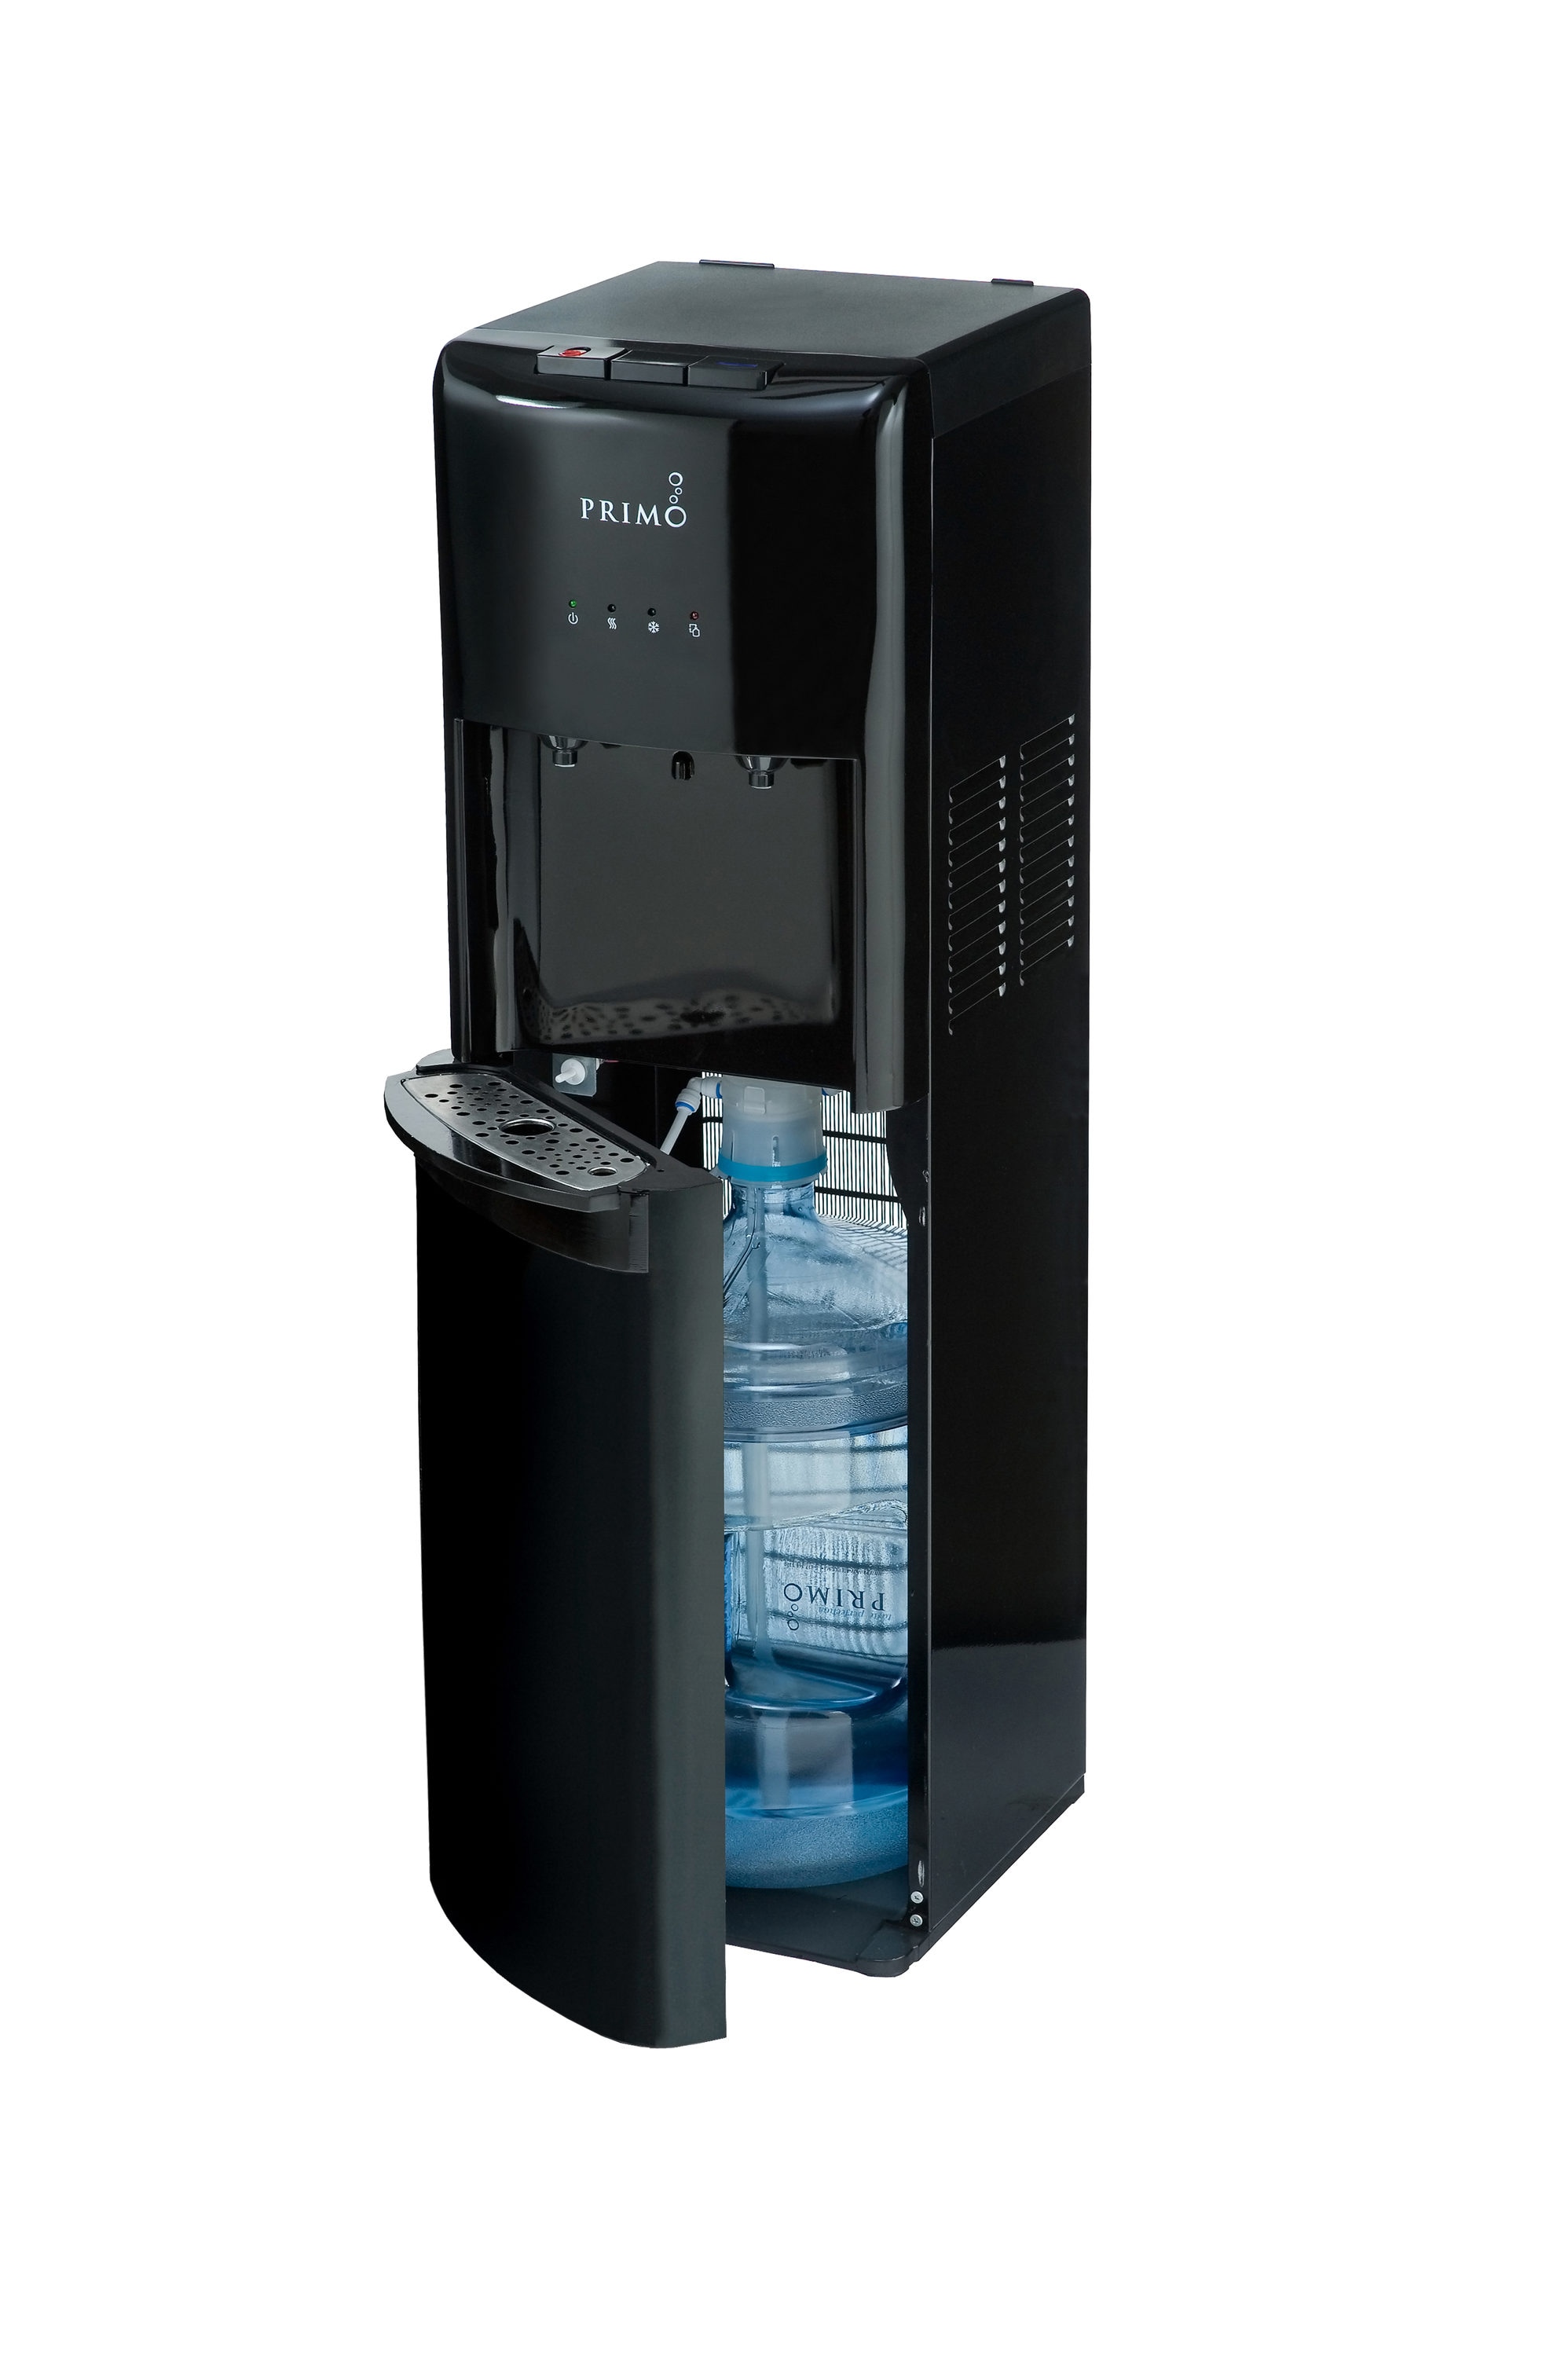 Primo Black Bottom-loading Cold and Hot Water Cooler at